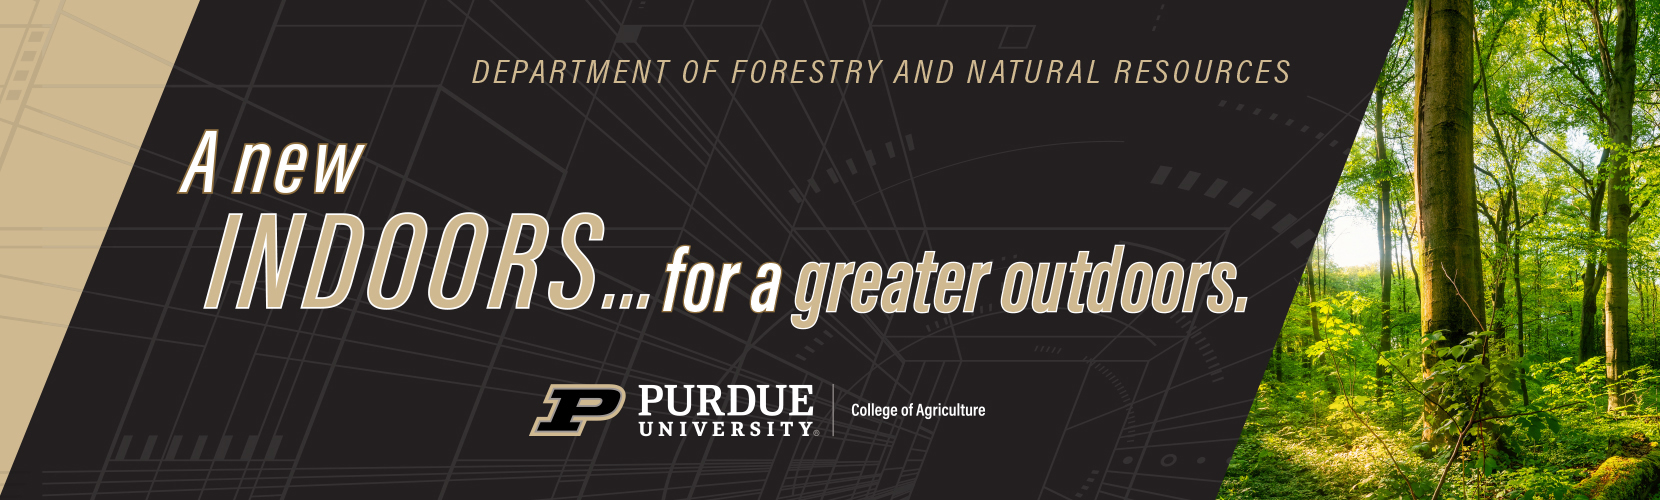 New building banner, architecture lines and forestry photo.